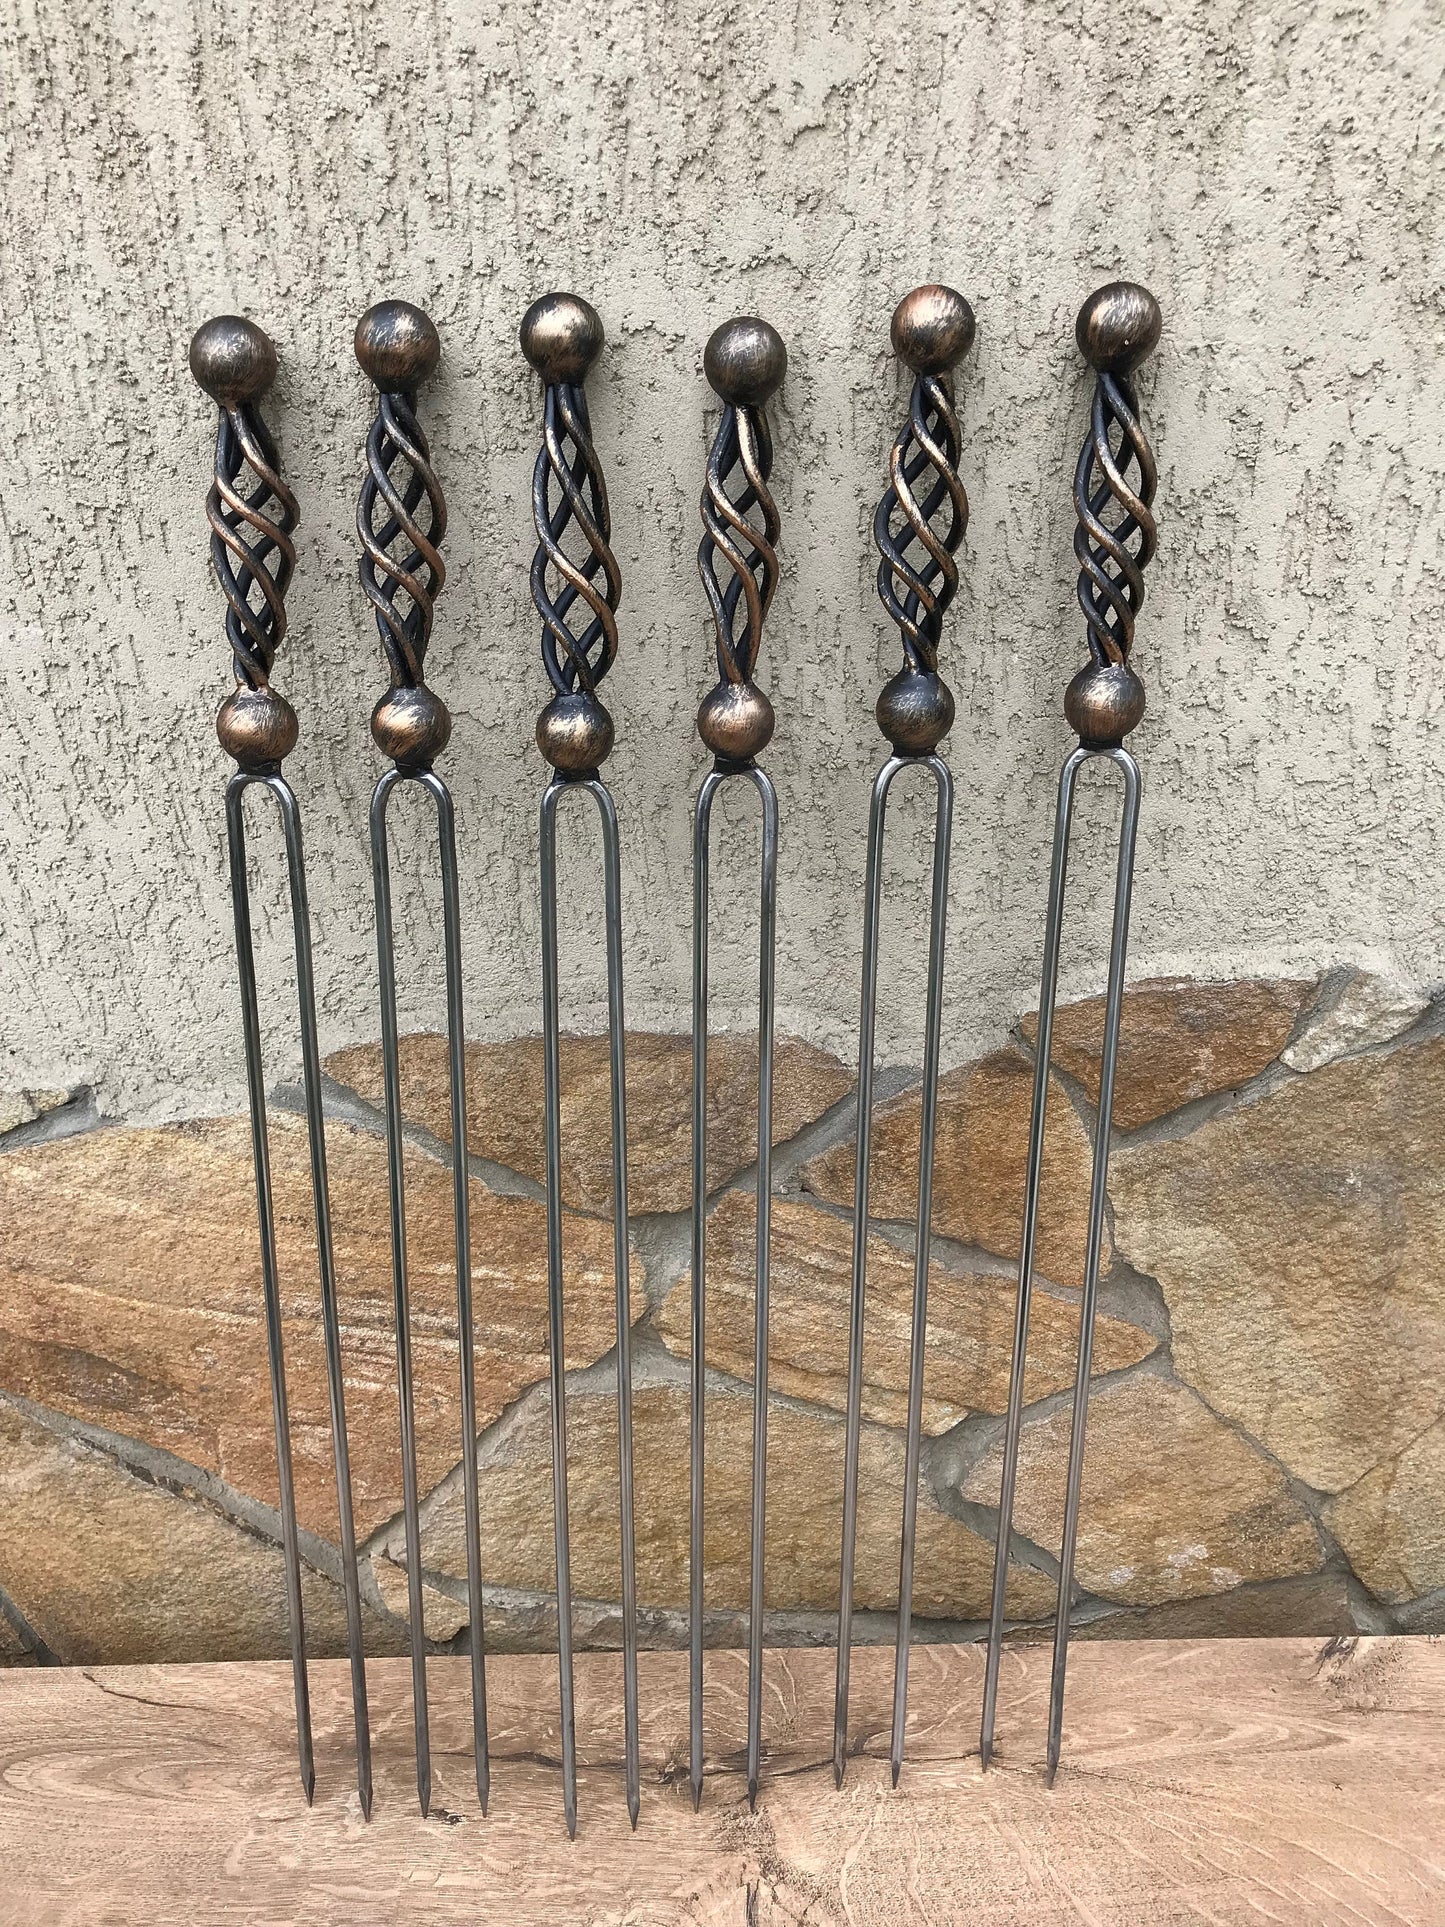 Forged skewers, metal skewers, iron gifts, grill accessories, grilled meat, iron gift, barbecue, BBQ, family reunion, picnic, stainless